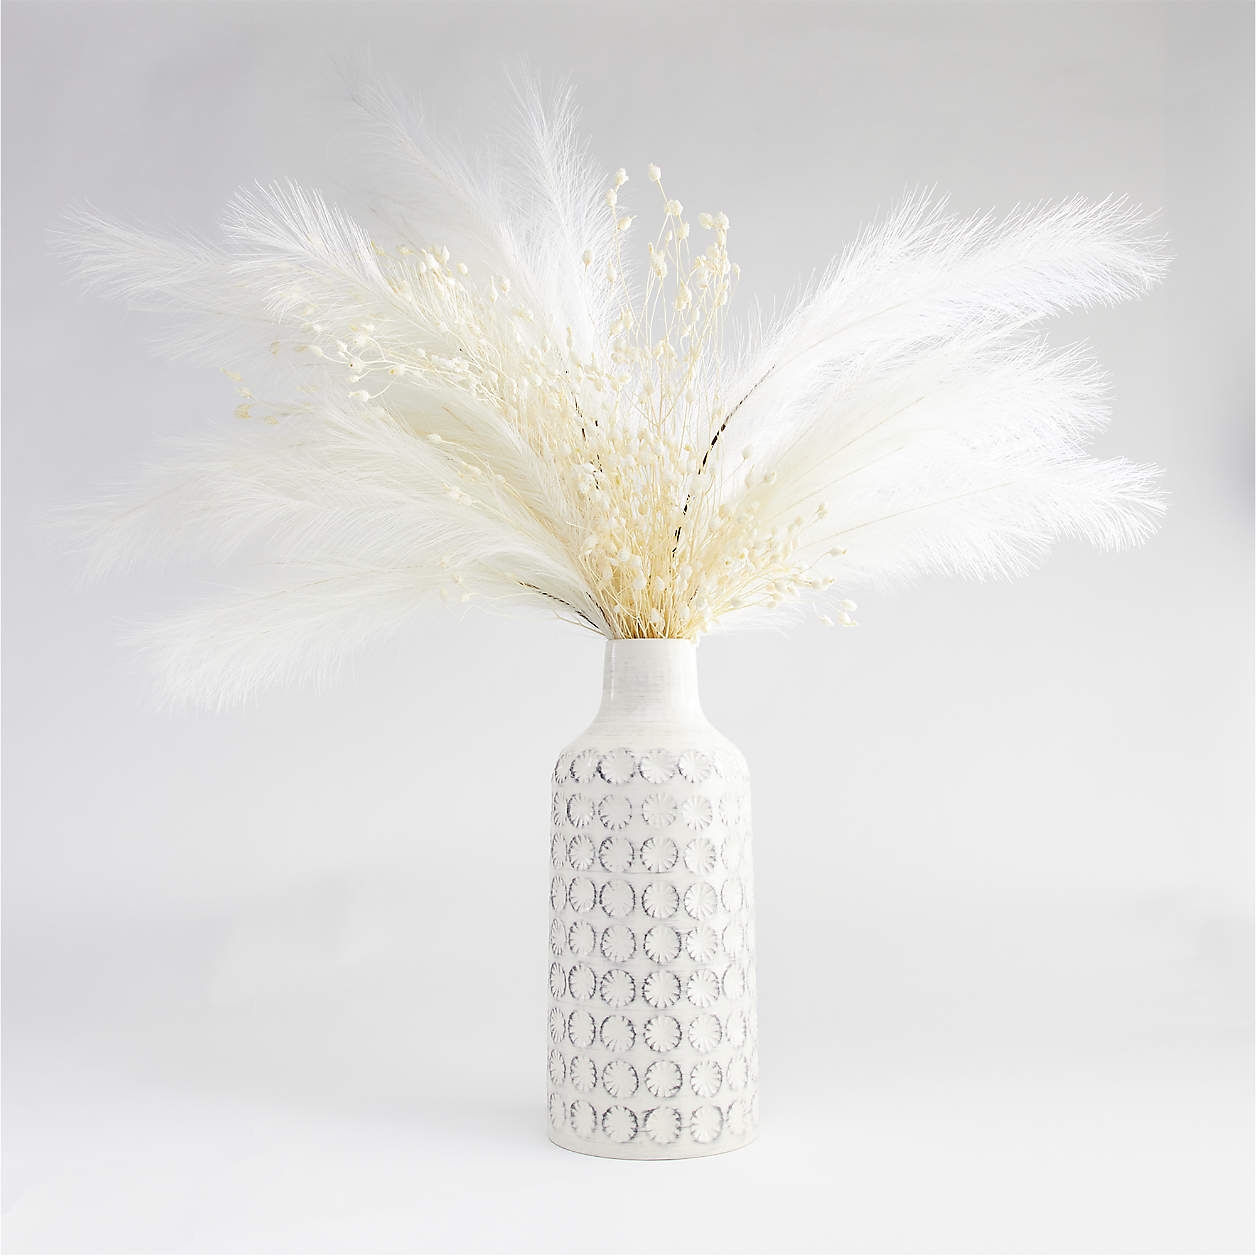 Faux Ivory Pampas Grass Bunch 45" - Image 7